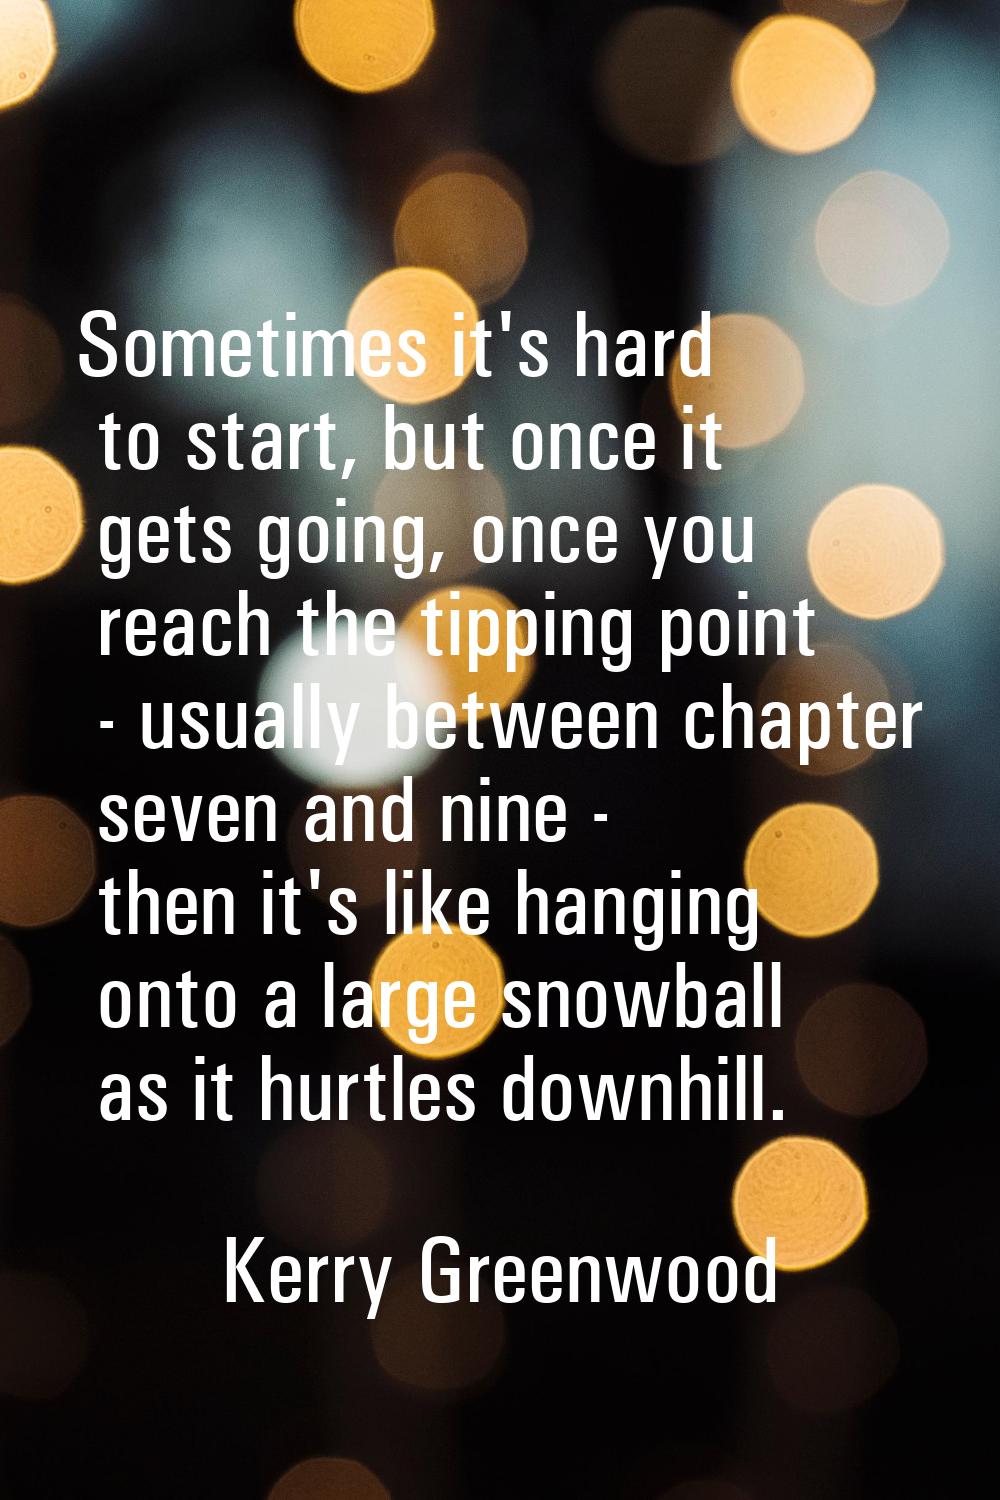 Sometimes it's hard to start, but once it gets going, once you reach the tipping point - usually be